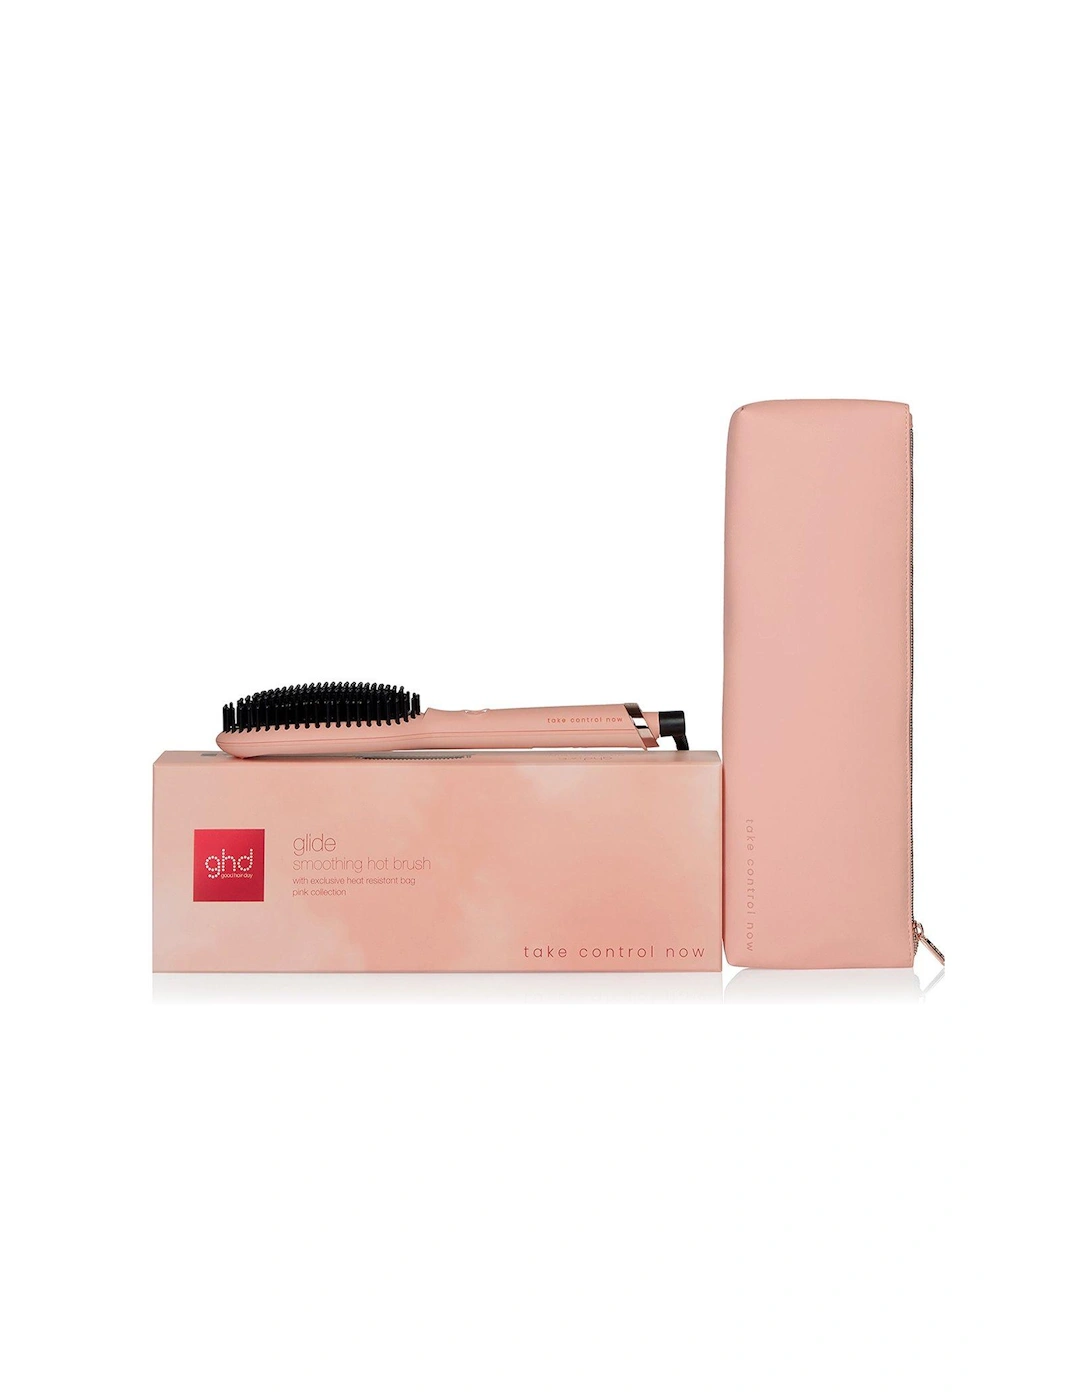 Glide Limited Edition Hot Brush - Pink Peach Charity Edition, 3 of 2